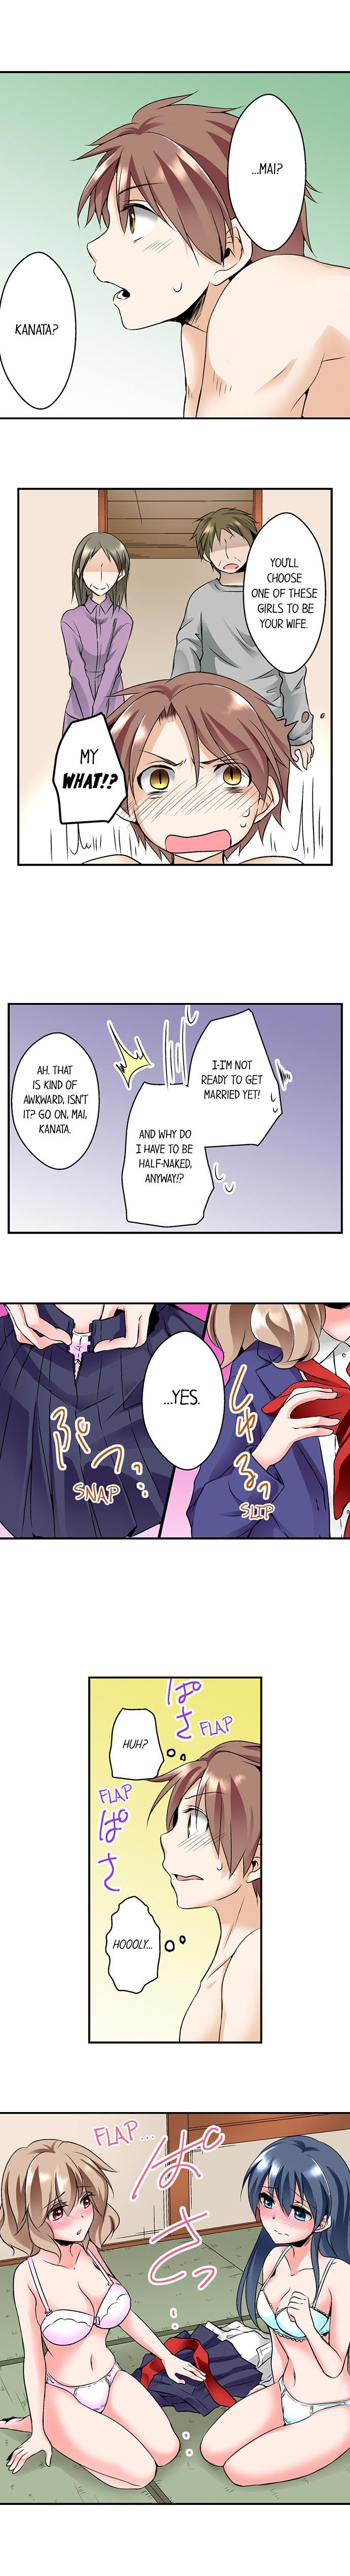 Pov Blowjob Naked Matchmaking with My Childhood Friends Ch.12/? Internal - Page 7